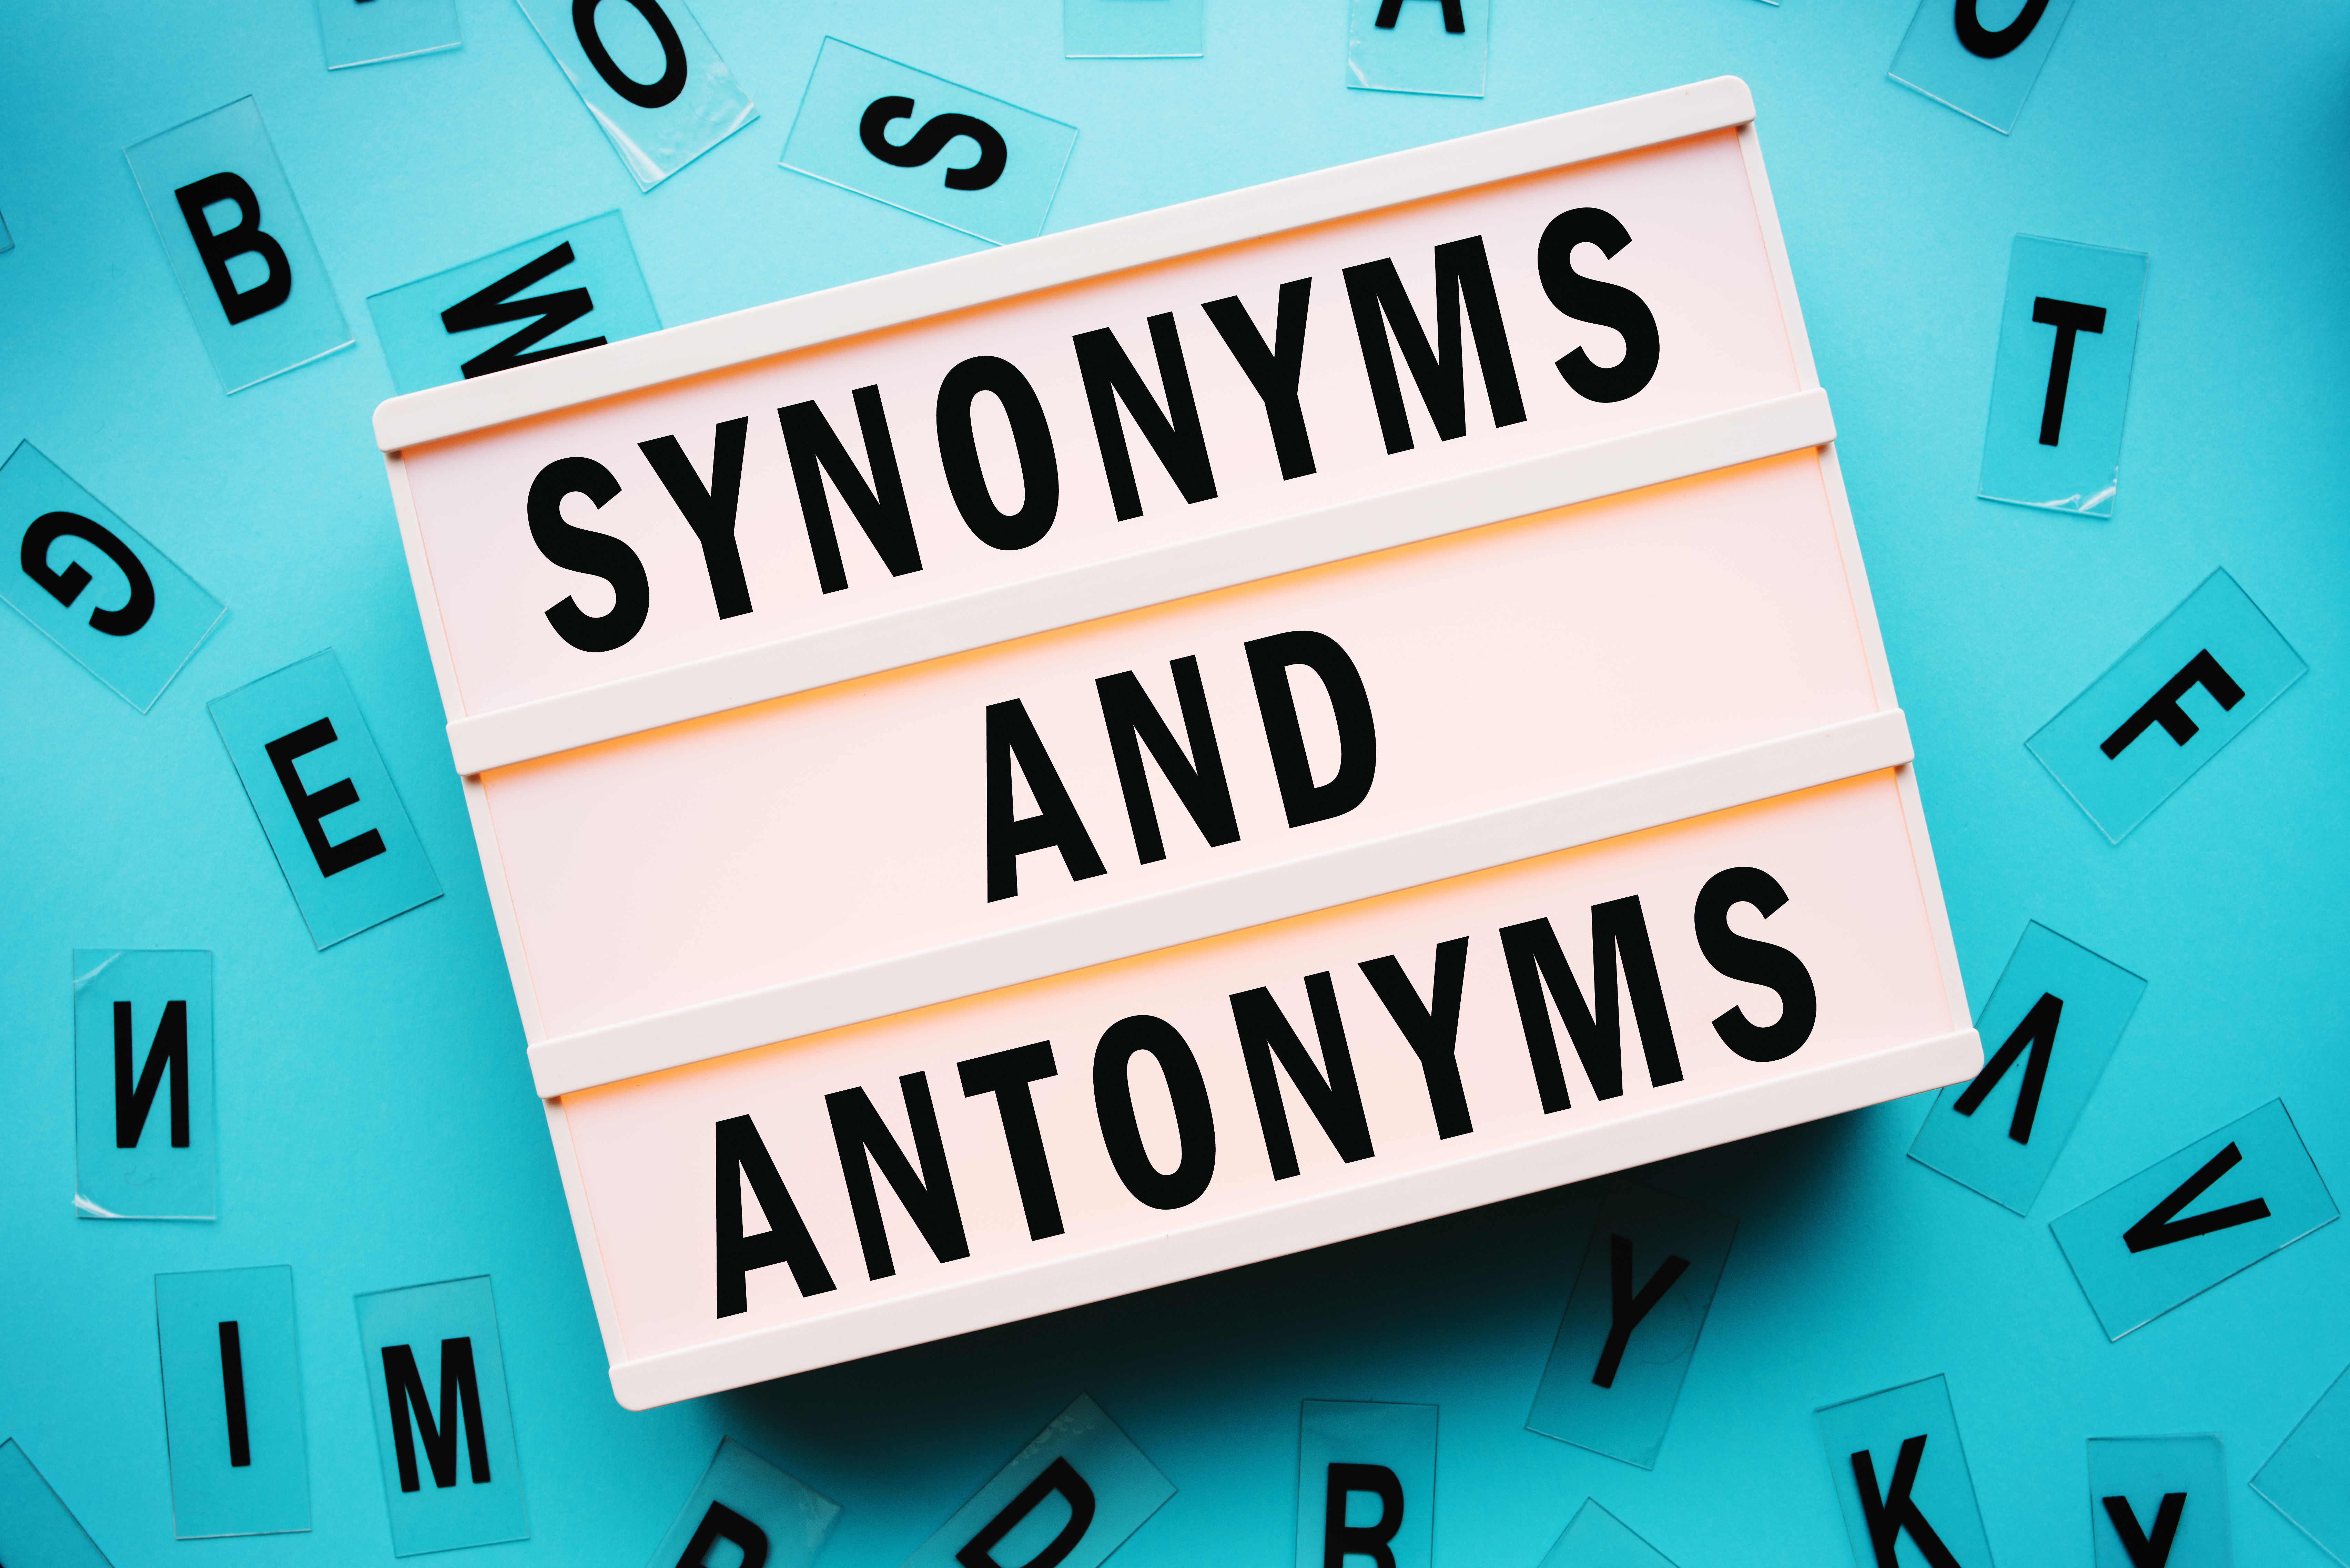 Synonym & Antonym: Definition, difference, and types